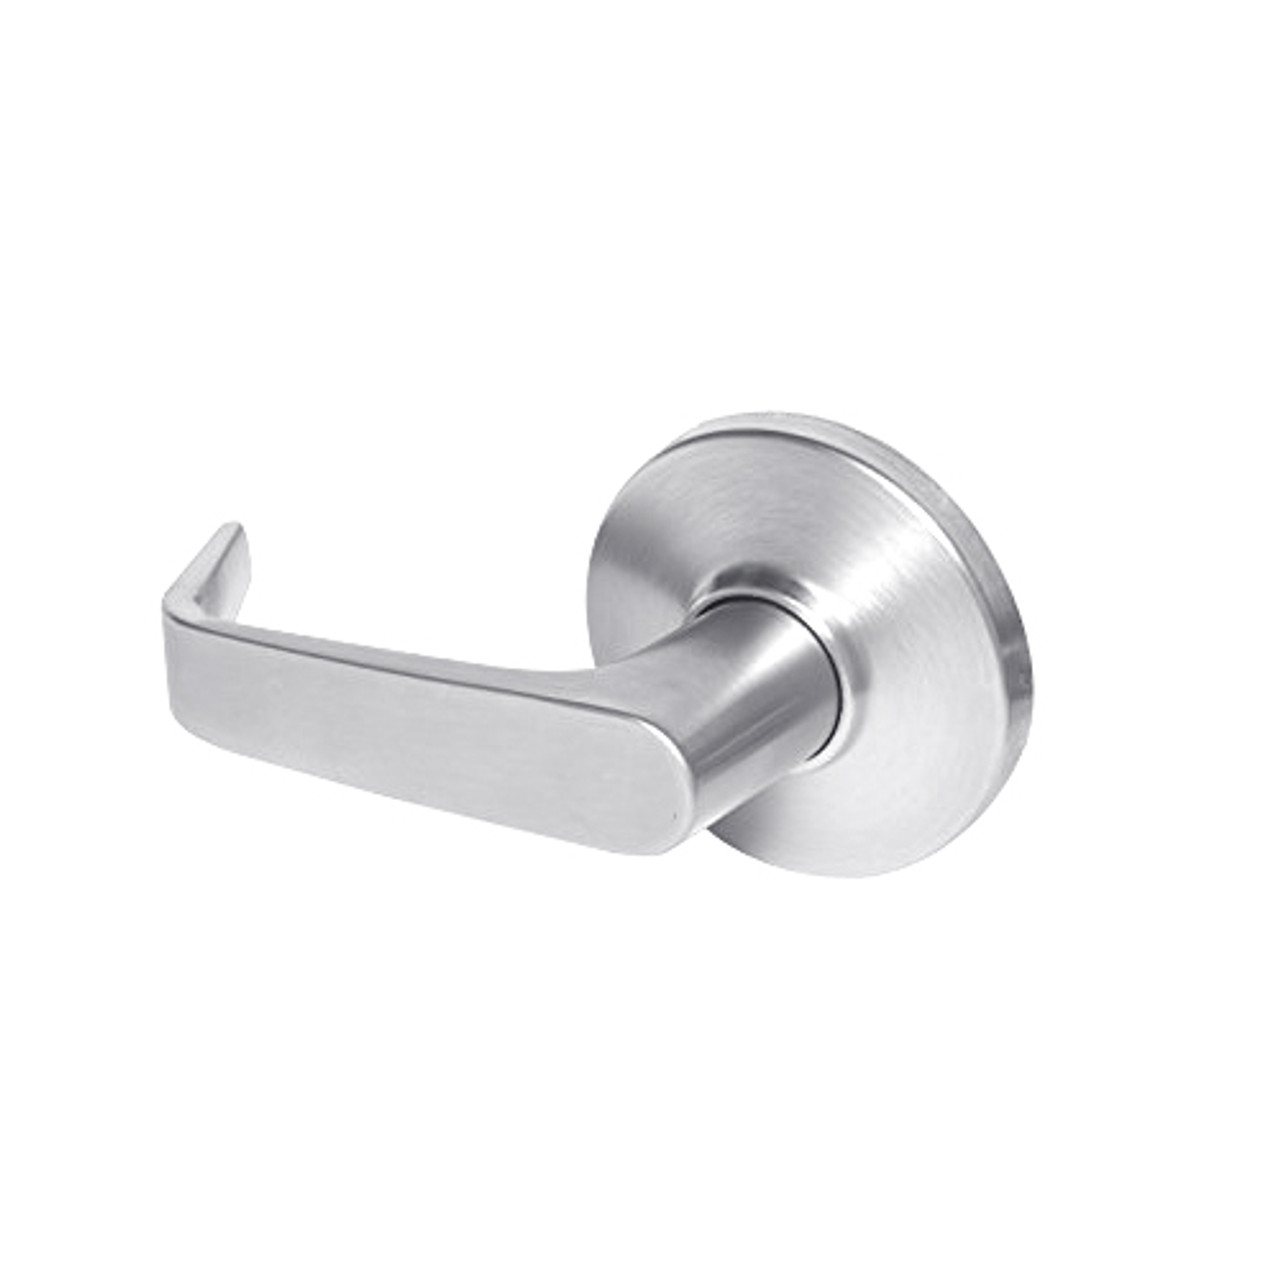 9K30Z15DSTK625 Best 9K Series Closet Heavy Duty Cylindrical Lever Locks with Contour Angle with Return Lever Design in Bright Chrome